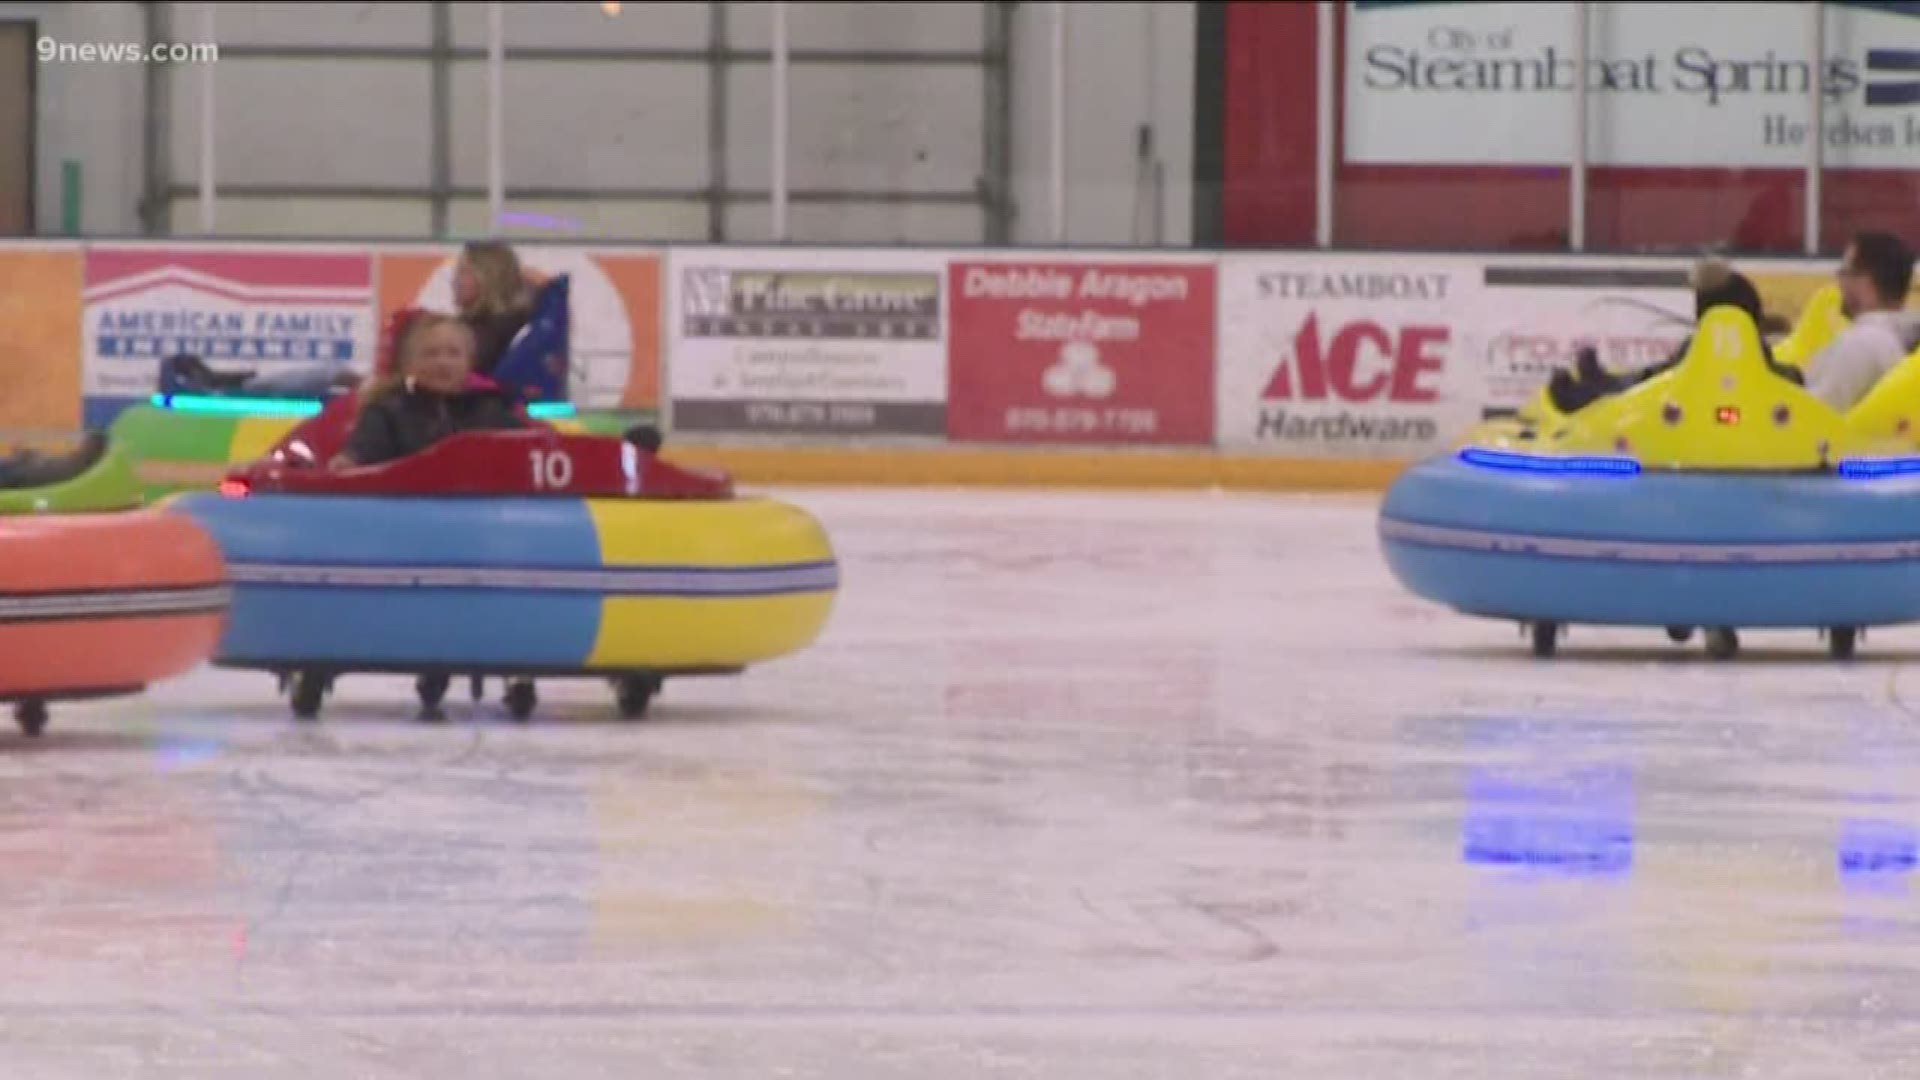 You can try out the bumper cars at the Howelsen Ice Arena in Steamboat Springs.